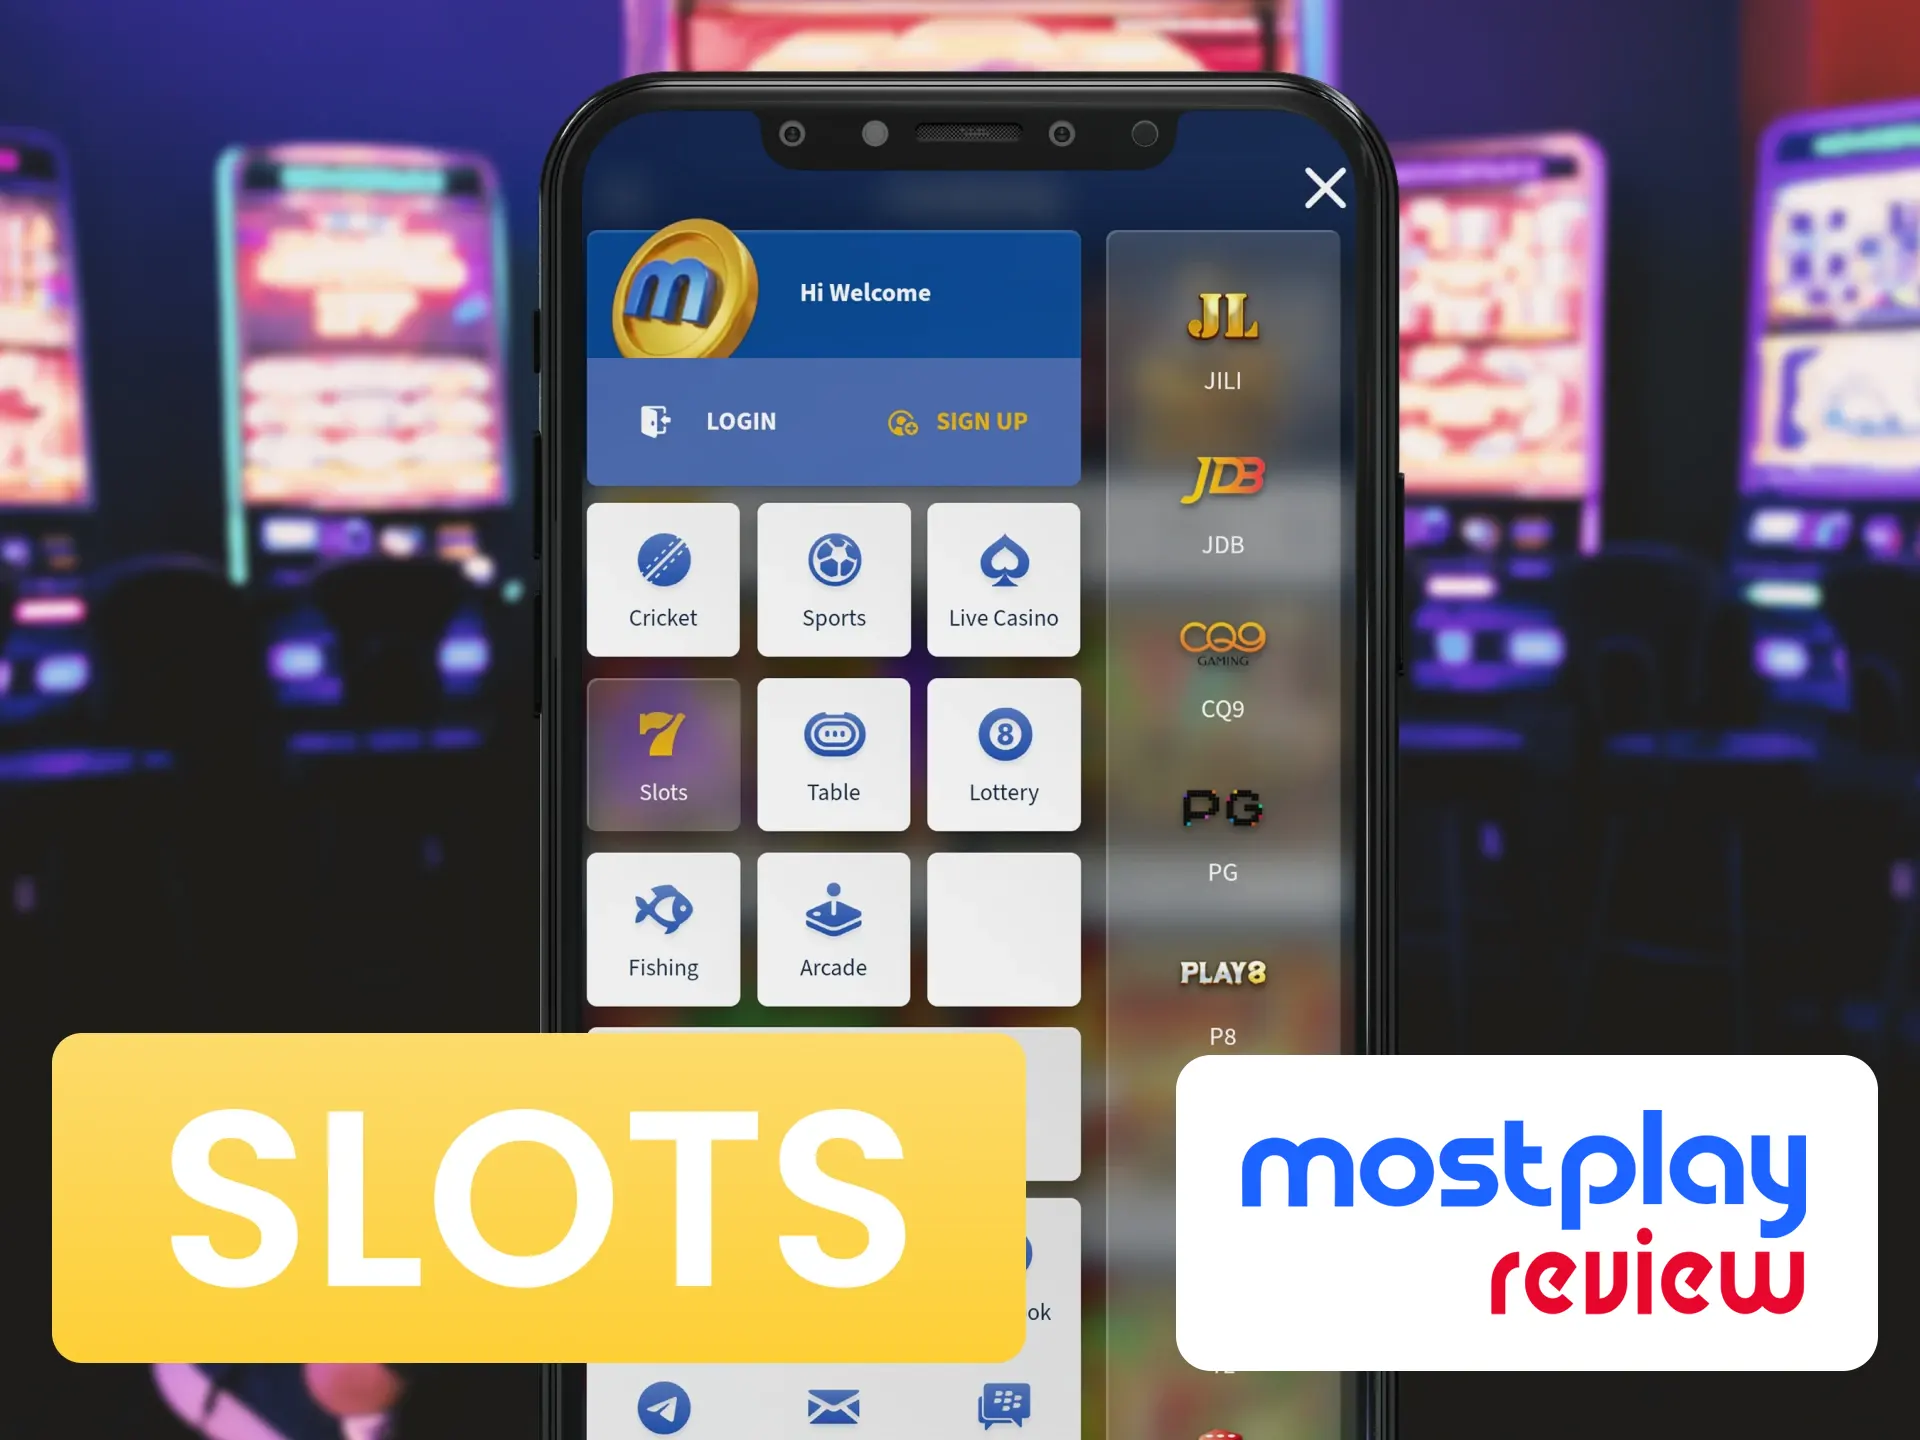 Search for your favourite casino slots at Mostplay.